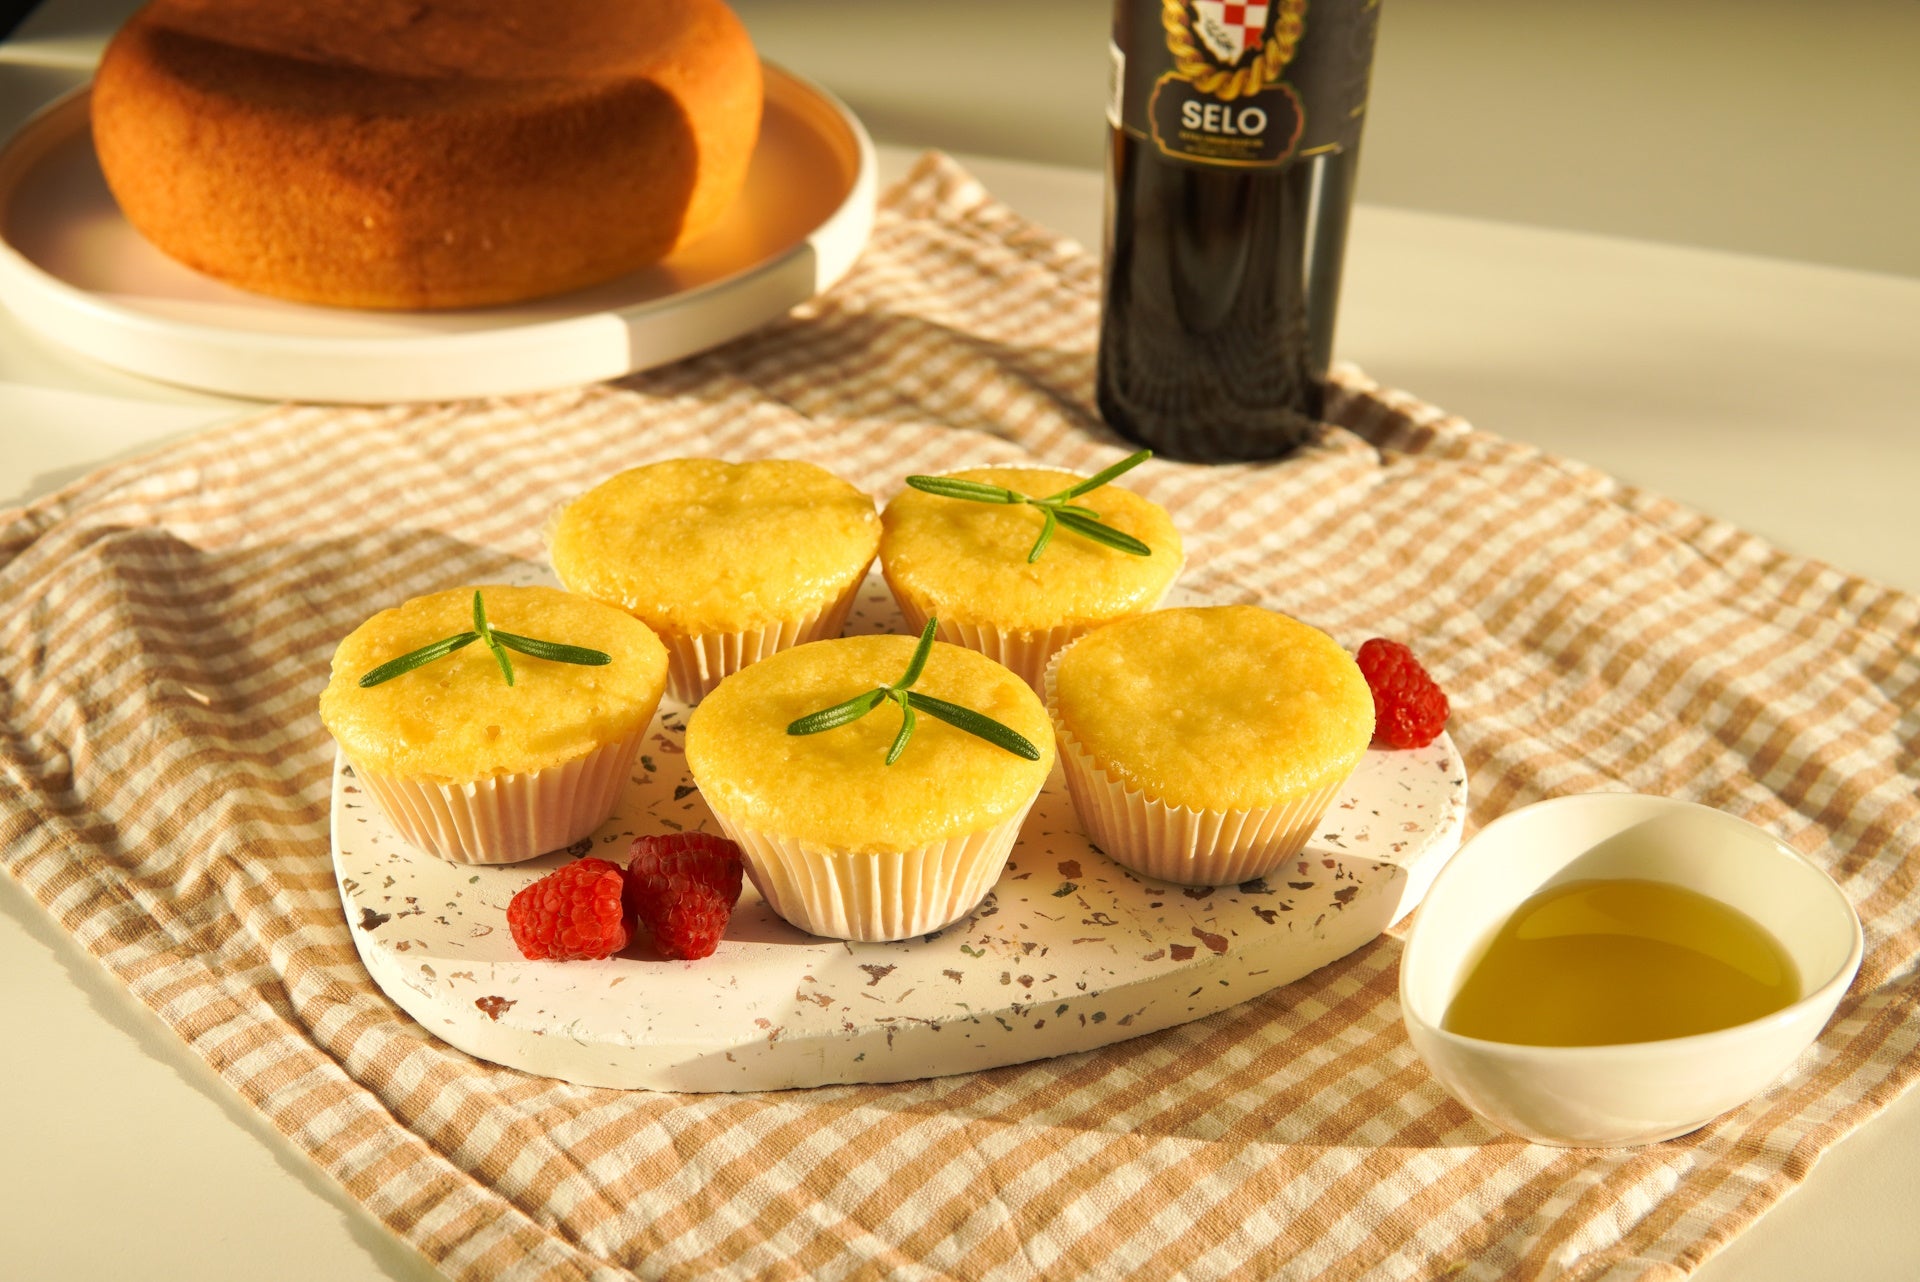 Image of a batch of fluffy cupcakes baked using Selo Croatian extra virgin olive oil, beautifully arranged on a pastel cupcake stand, with a clear glass bottle of Selo olive oil tastefully positioned in the background.